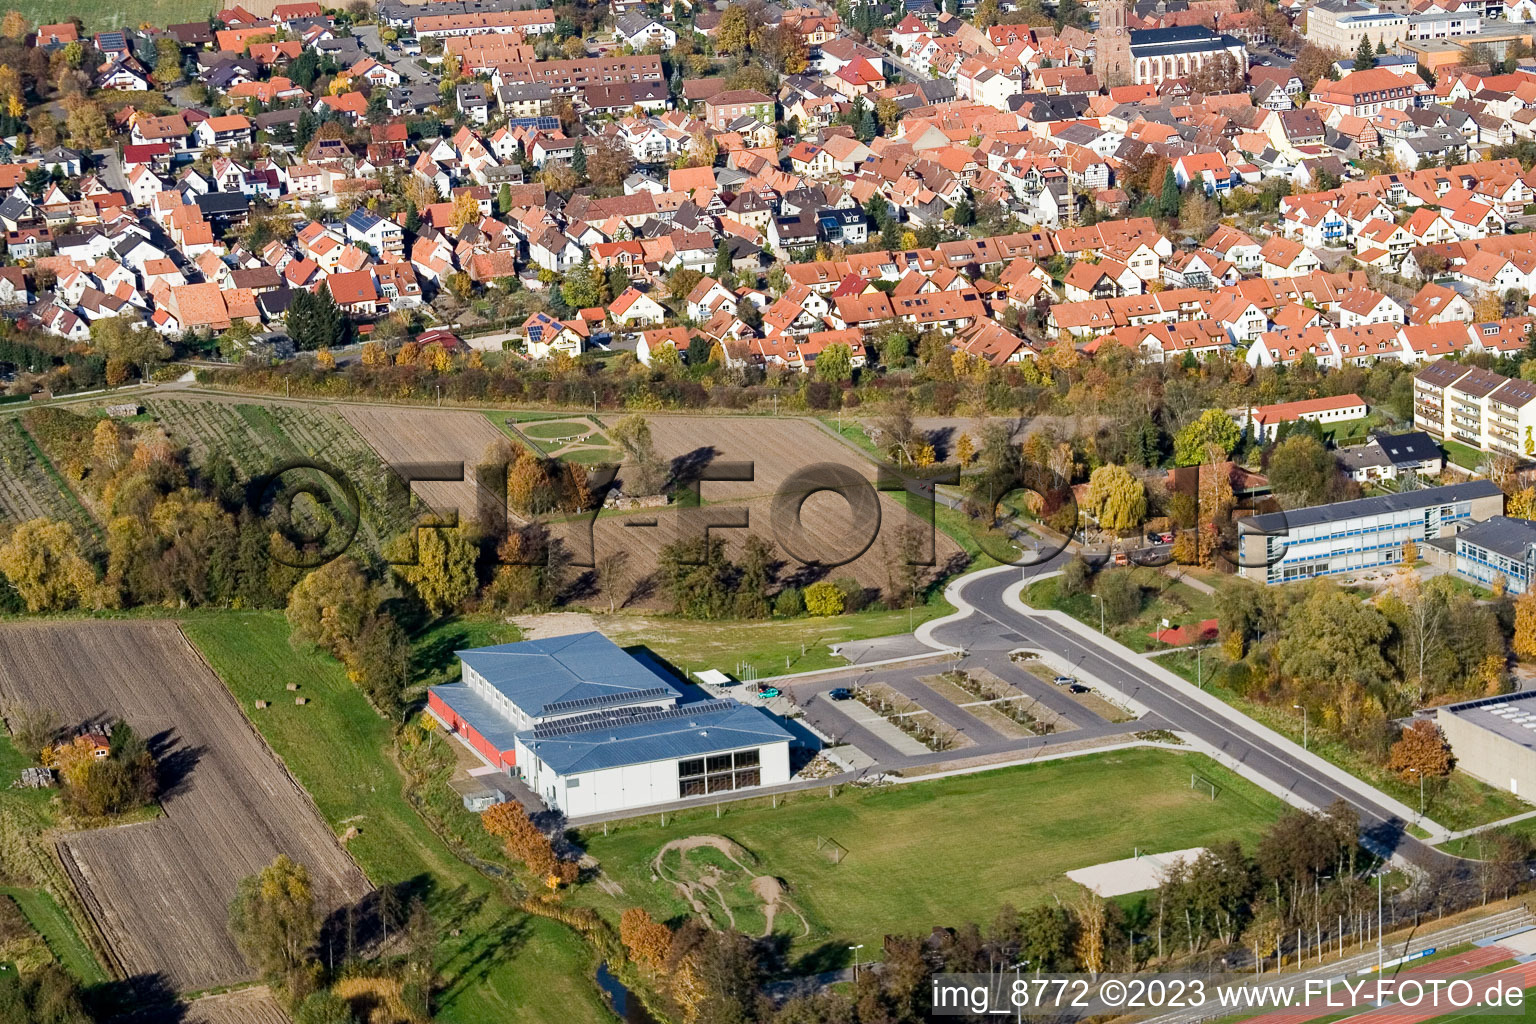 Bienwaldhalle in Kandel in the state Rhineland-Palatinate, Germany viewn from the air